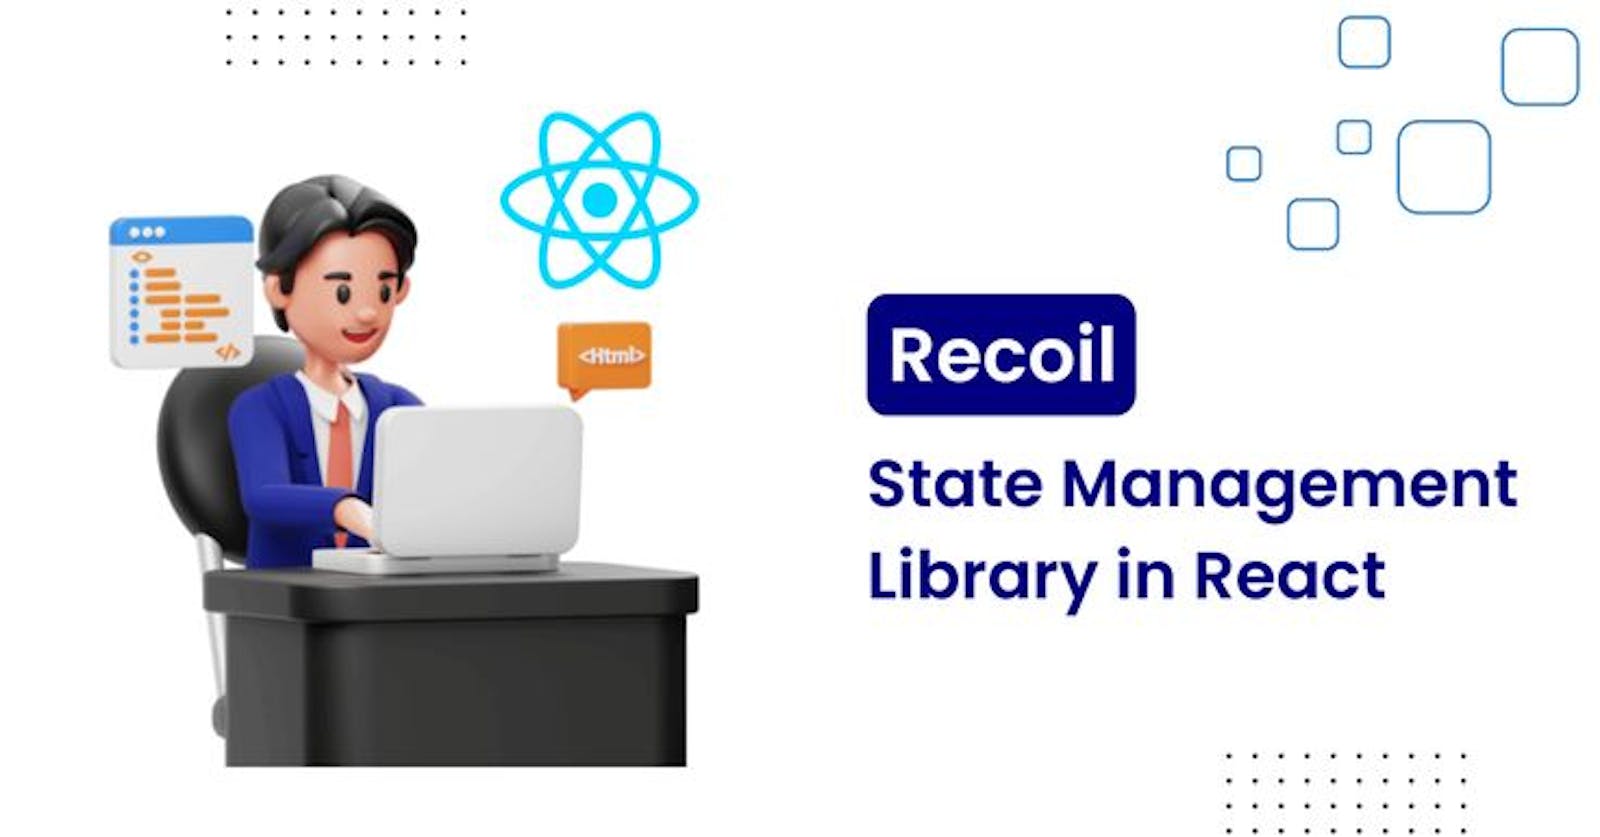 Recoil - The React State Management Library